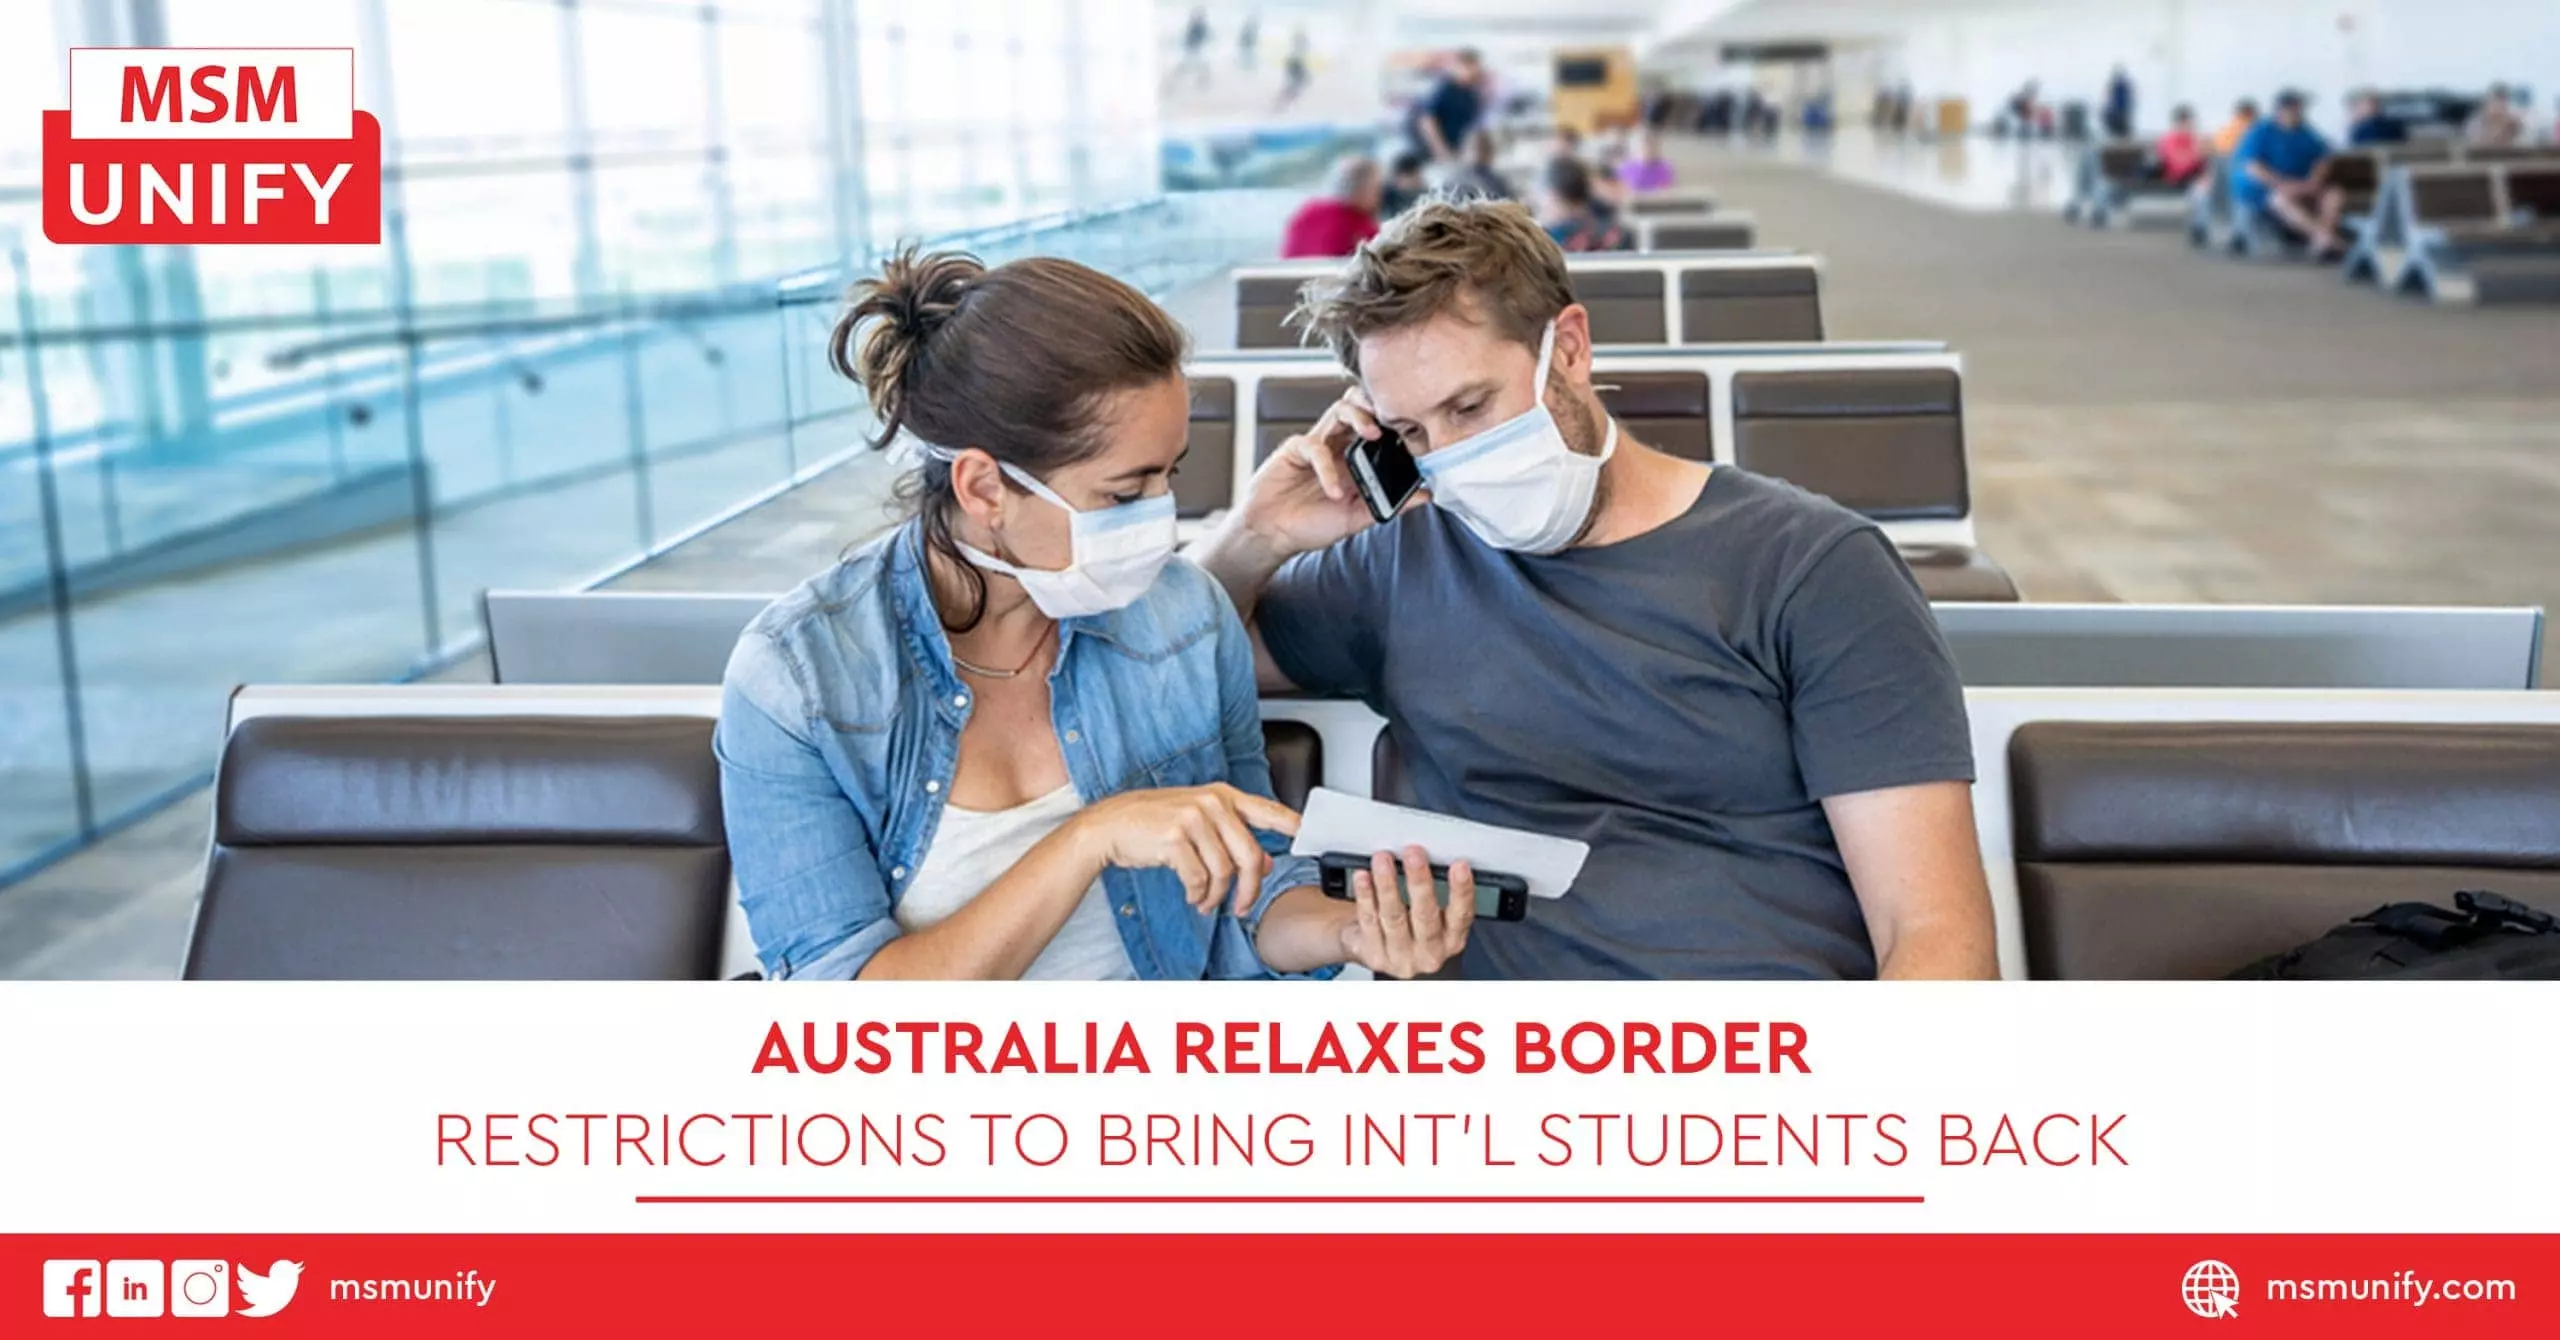 Australia Relaxes Border Restrictions To Bring Intl Students Back scaled 1